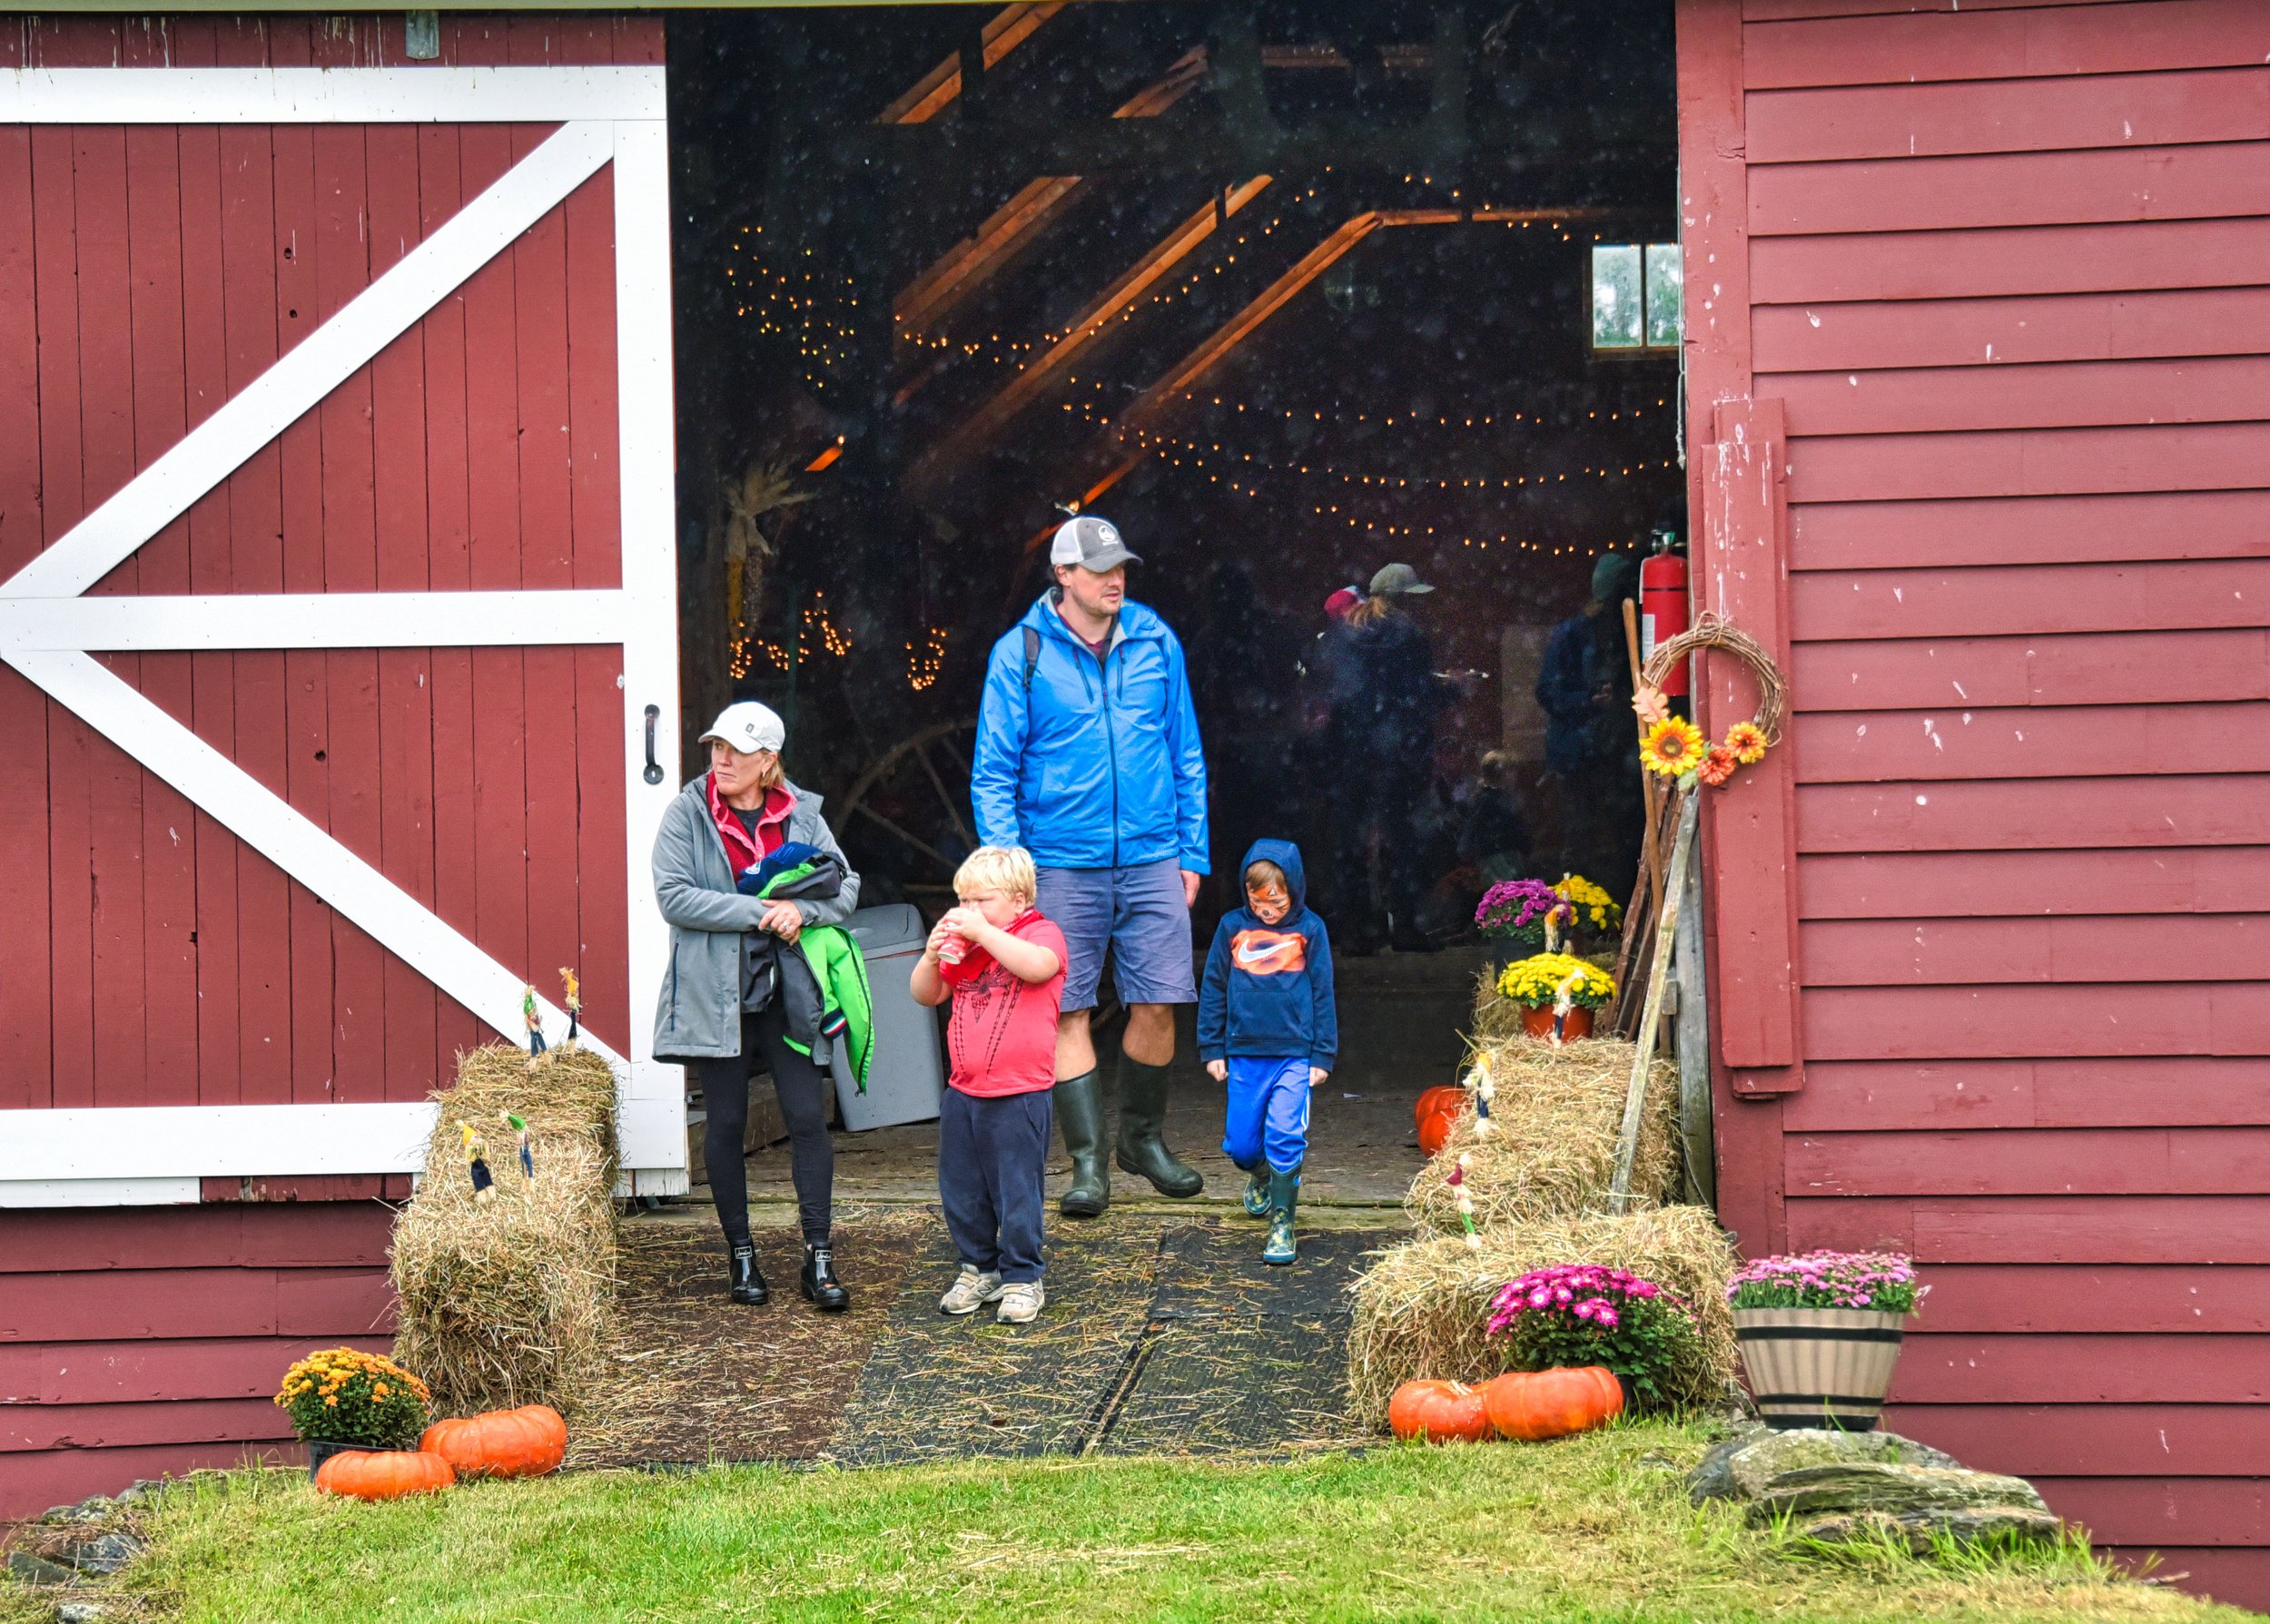  Besides dancing, hayrides, pony rides and cow-watching, Barn Dance activities included face painting, farm-themed temporary tattoos, farm-animal masks and the ever-popular kiddie pool filled with whole kernel corn. Photo by Gordon Miller  